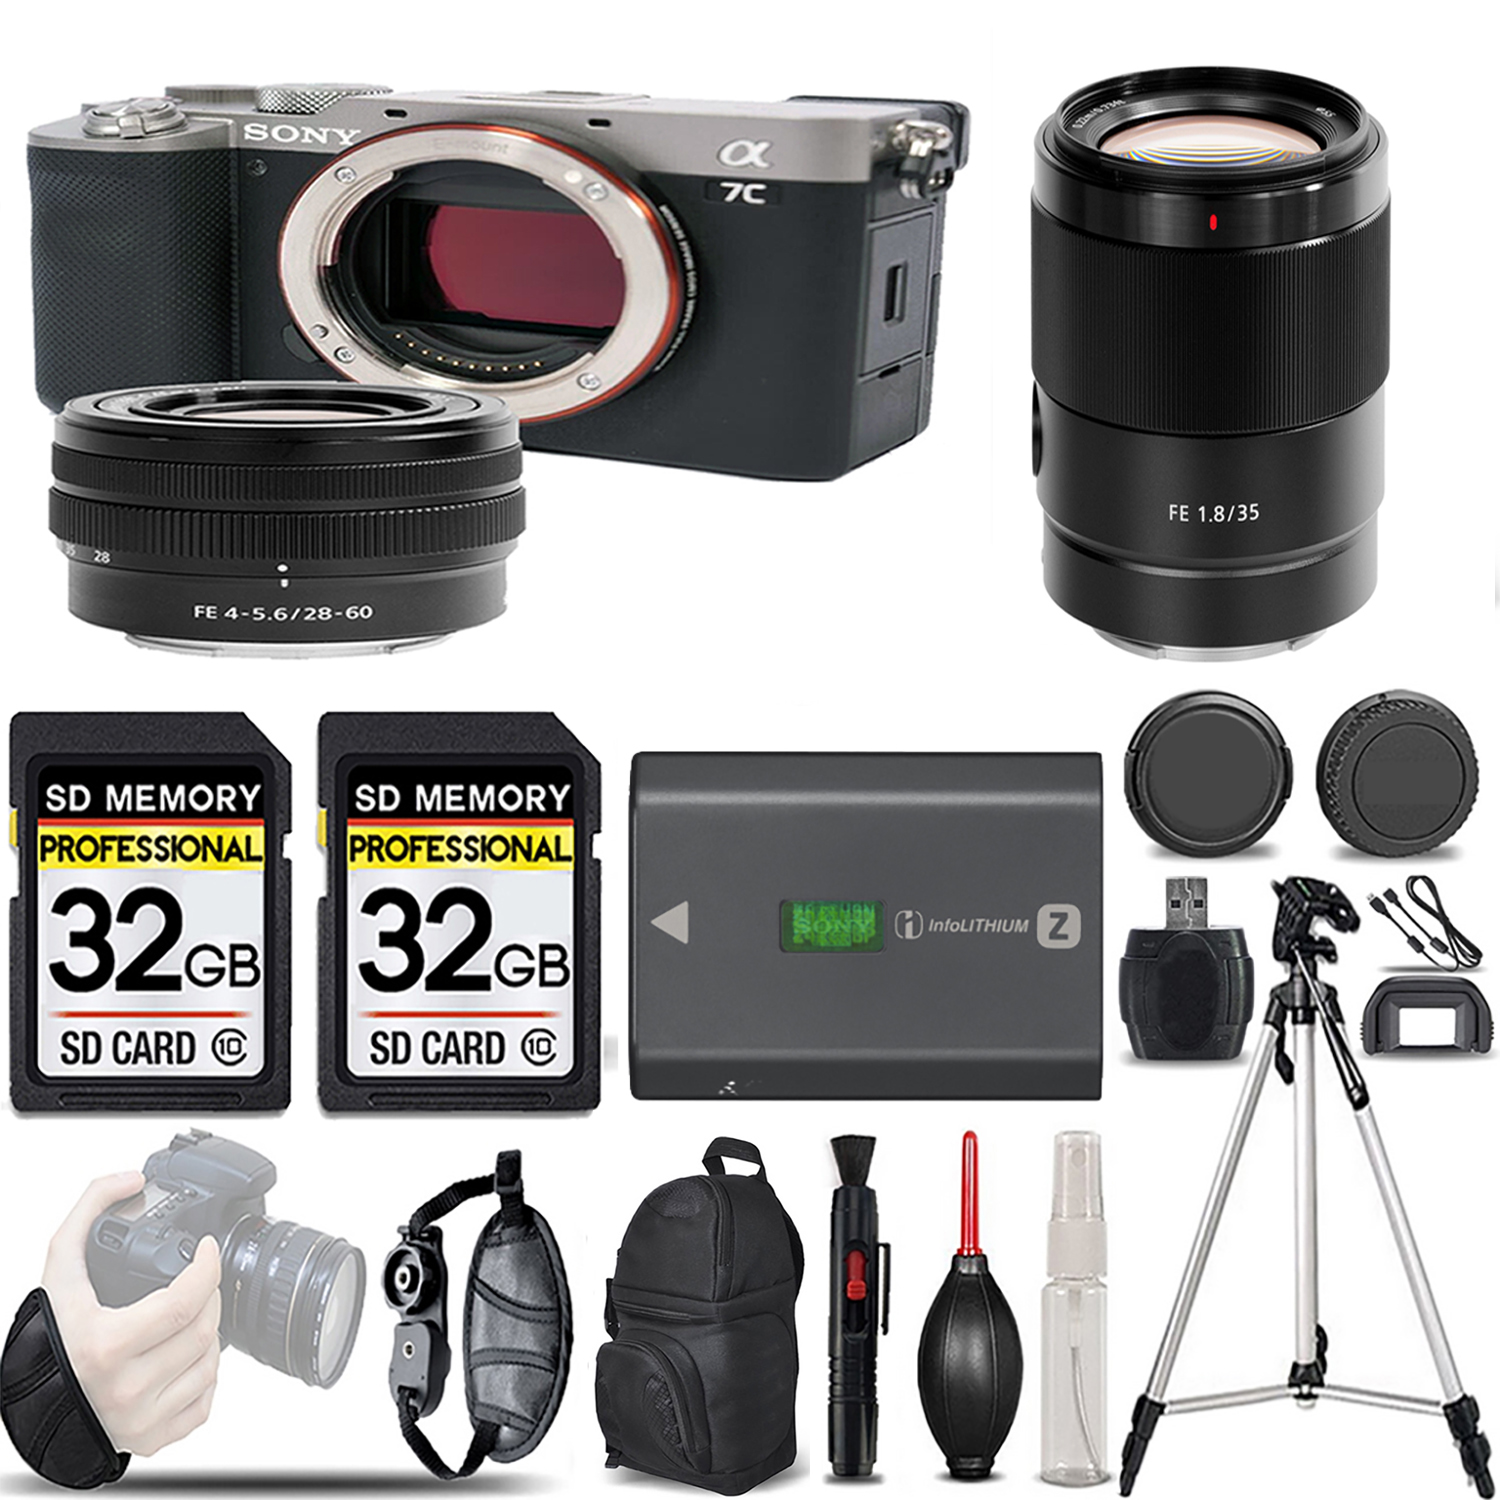 Alpha a7C Mirrorless Camera (Silver) + 28-60mm Lens + 35mm Lens - LOADED KIT *FREE SHIPPING*